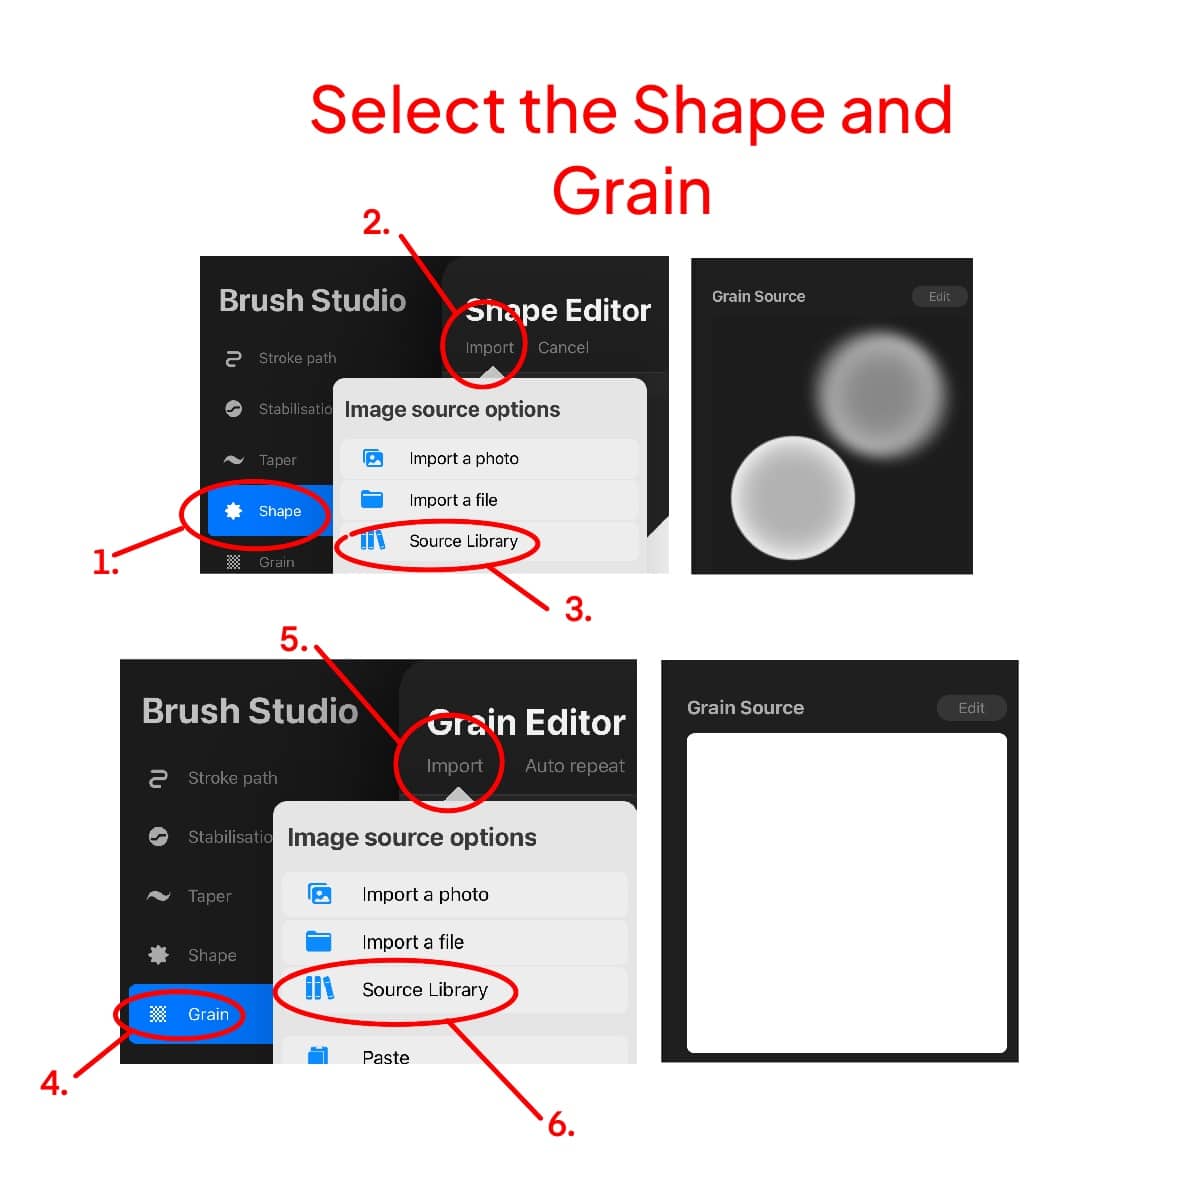 Selecting the shape and grain